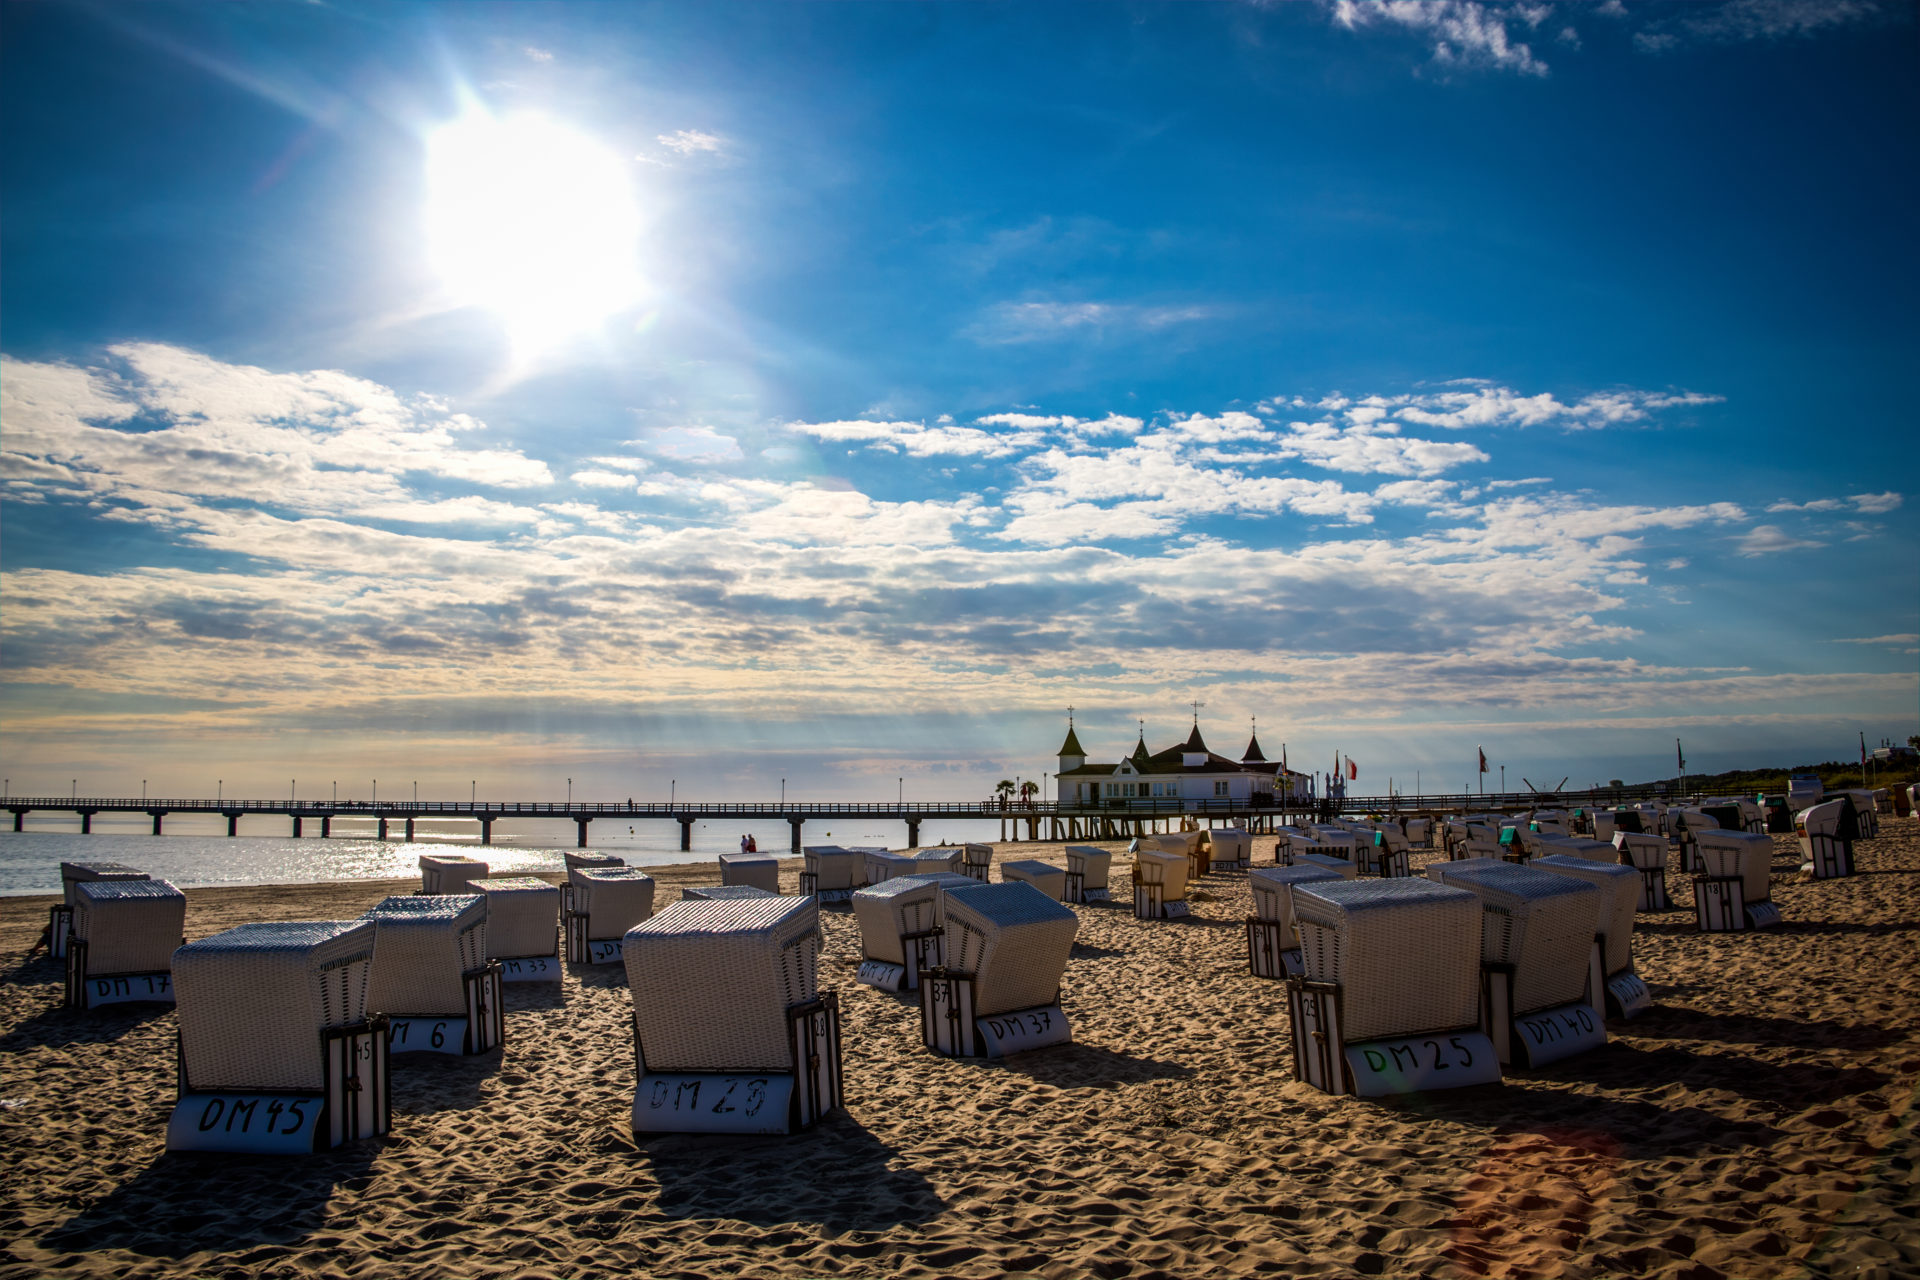 Pier in Ahlbeck and beach of Ahlbeck with beach chairs | Imperial Baths Usedom